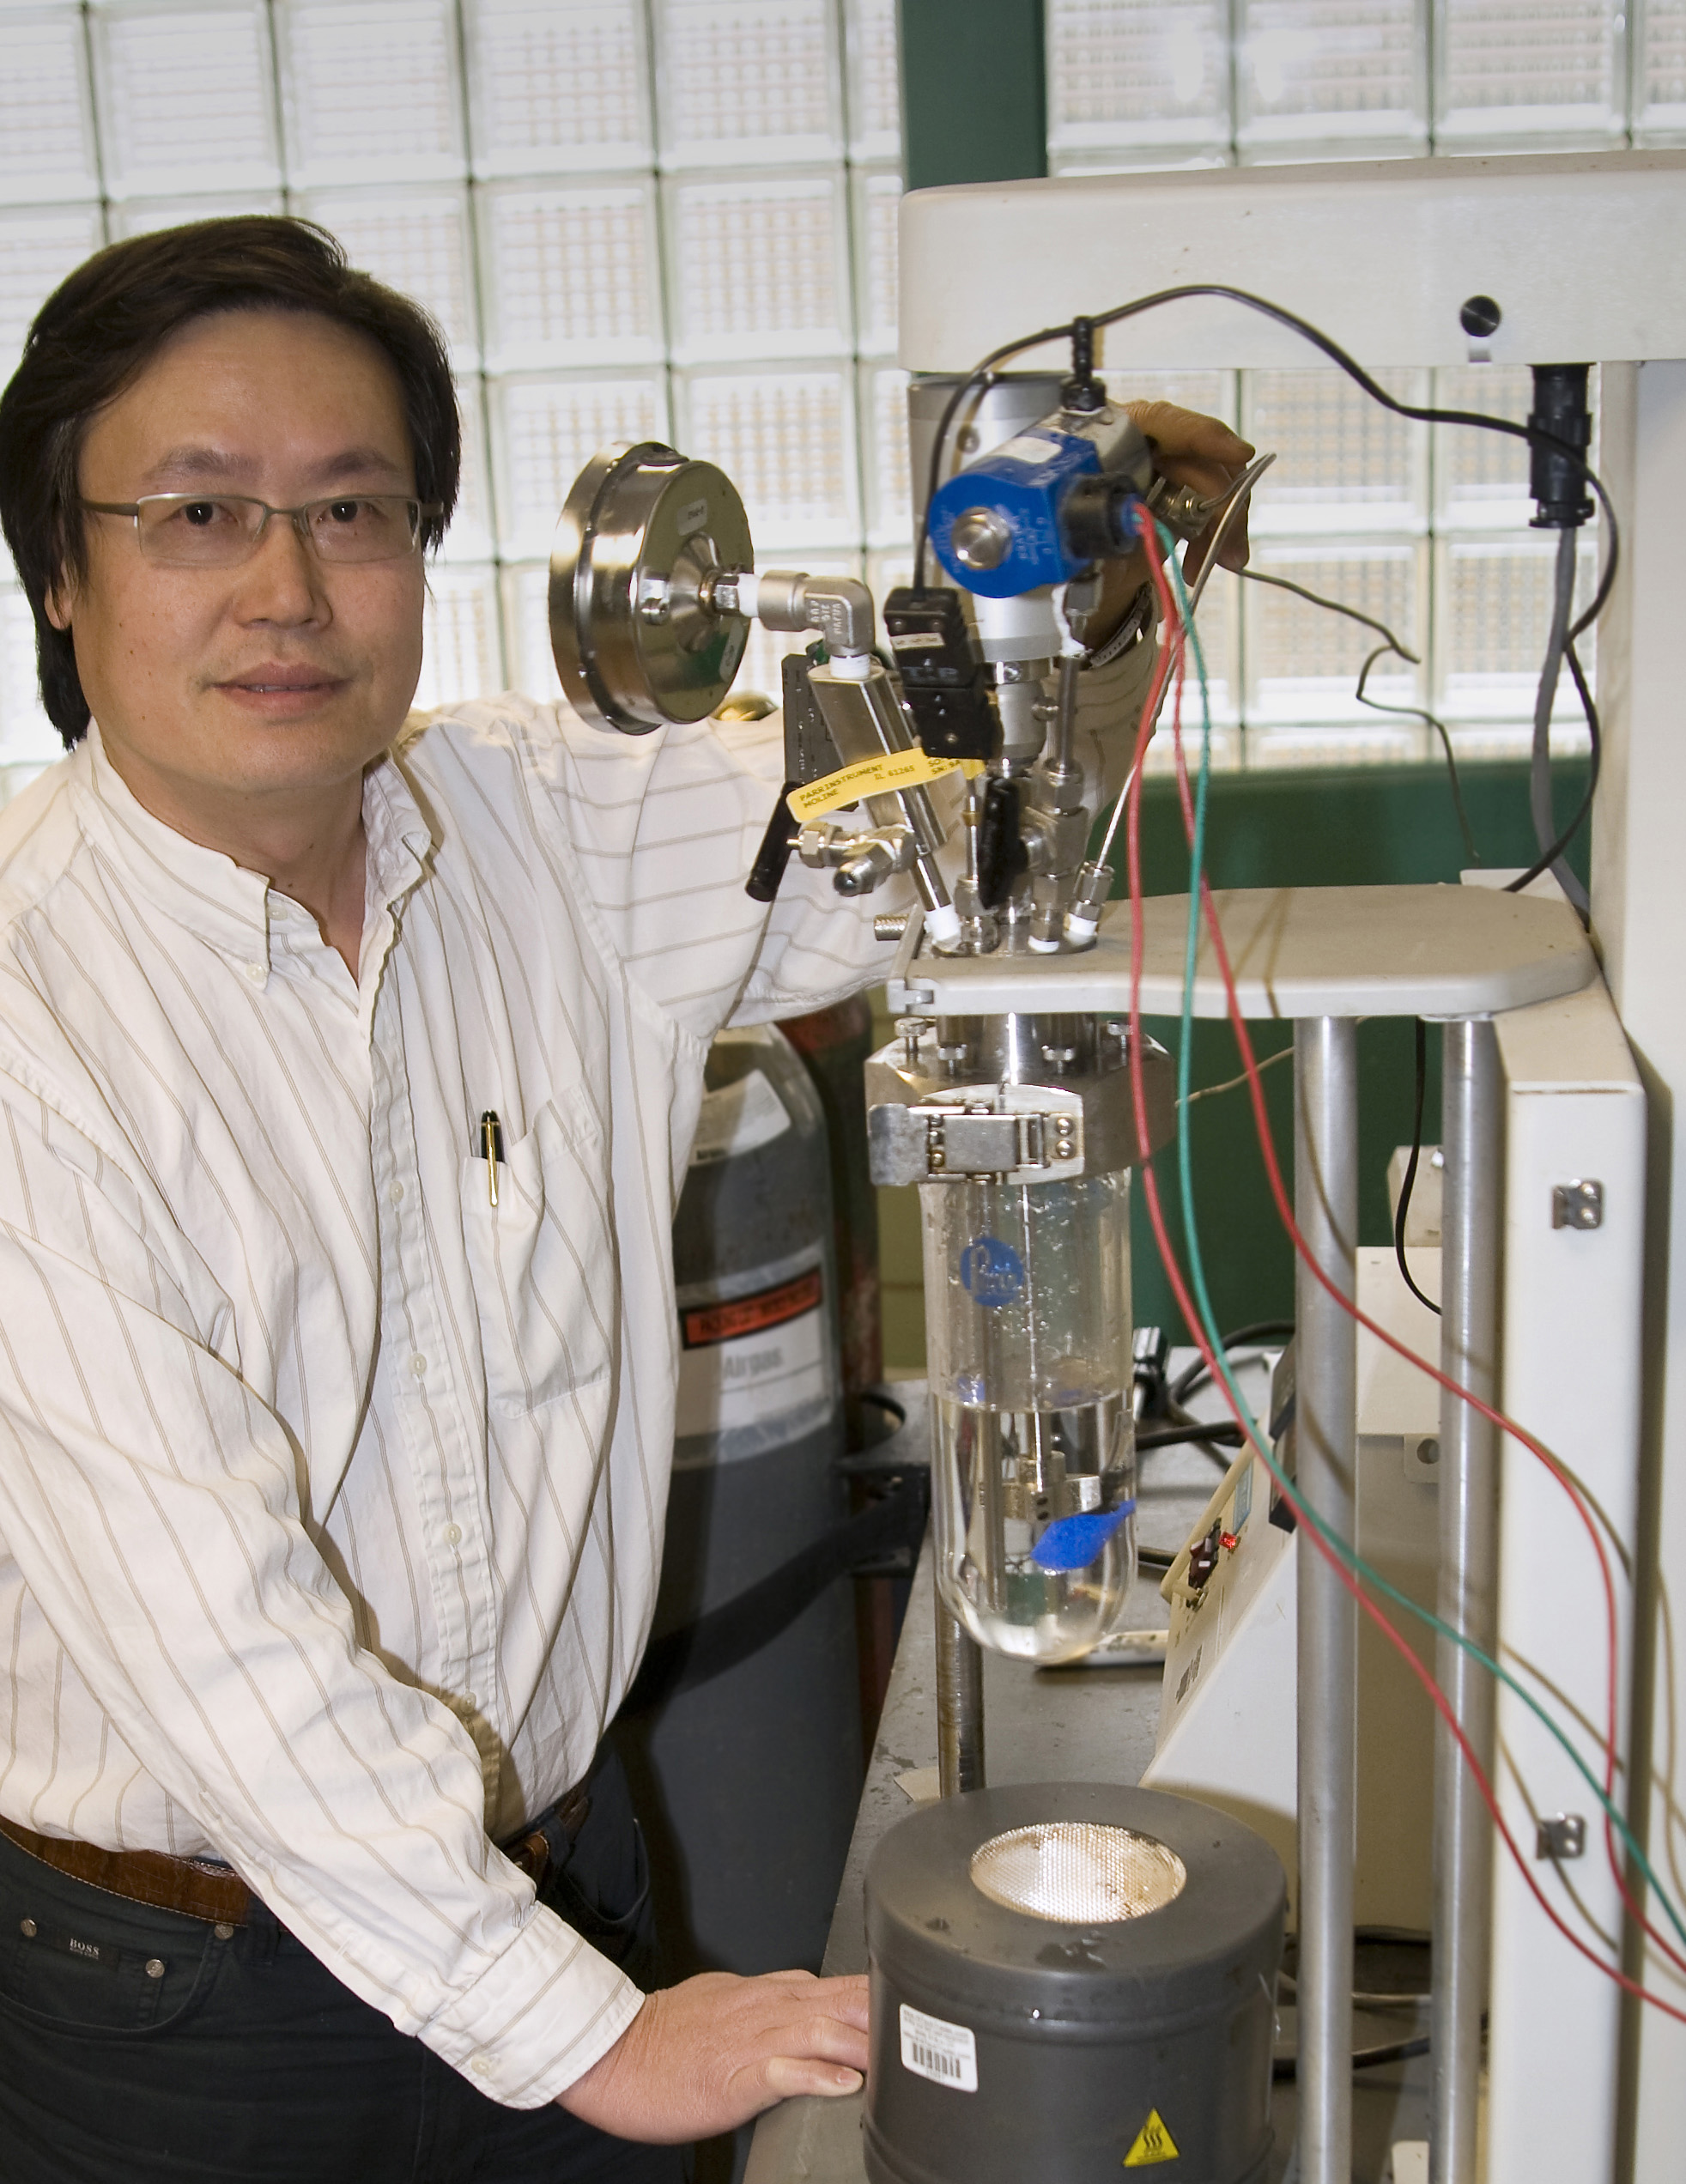 Andy Hong, a civil and environmental engineering professor at the University of Utah, used a chemical reactor similar to the one shown here to develop and test a new method for removing pollutants, including oil sheen, from water and in some cases soil.